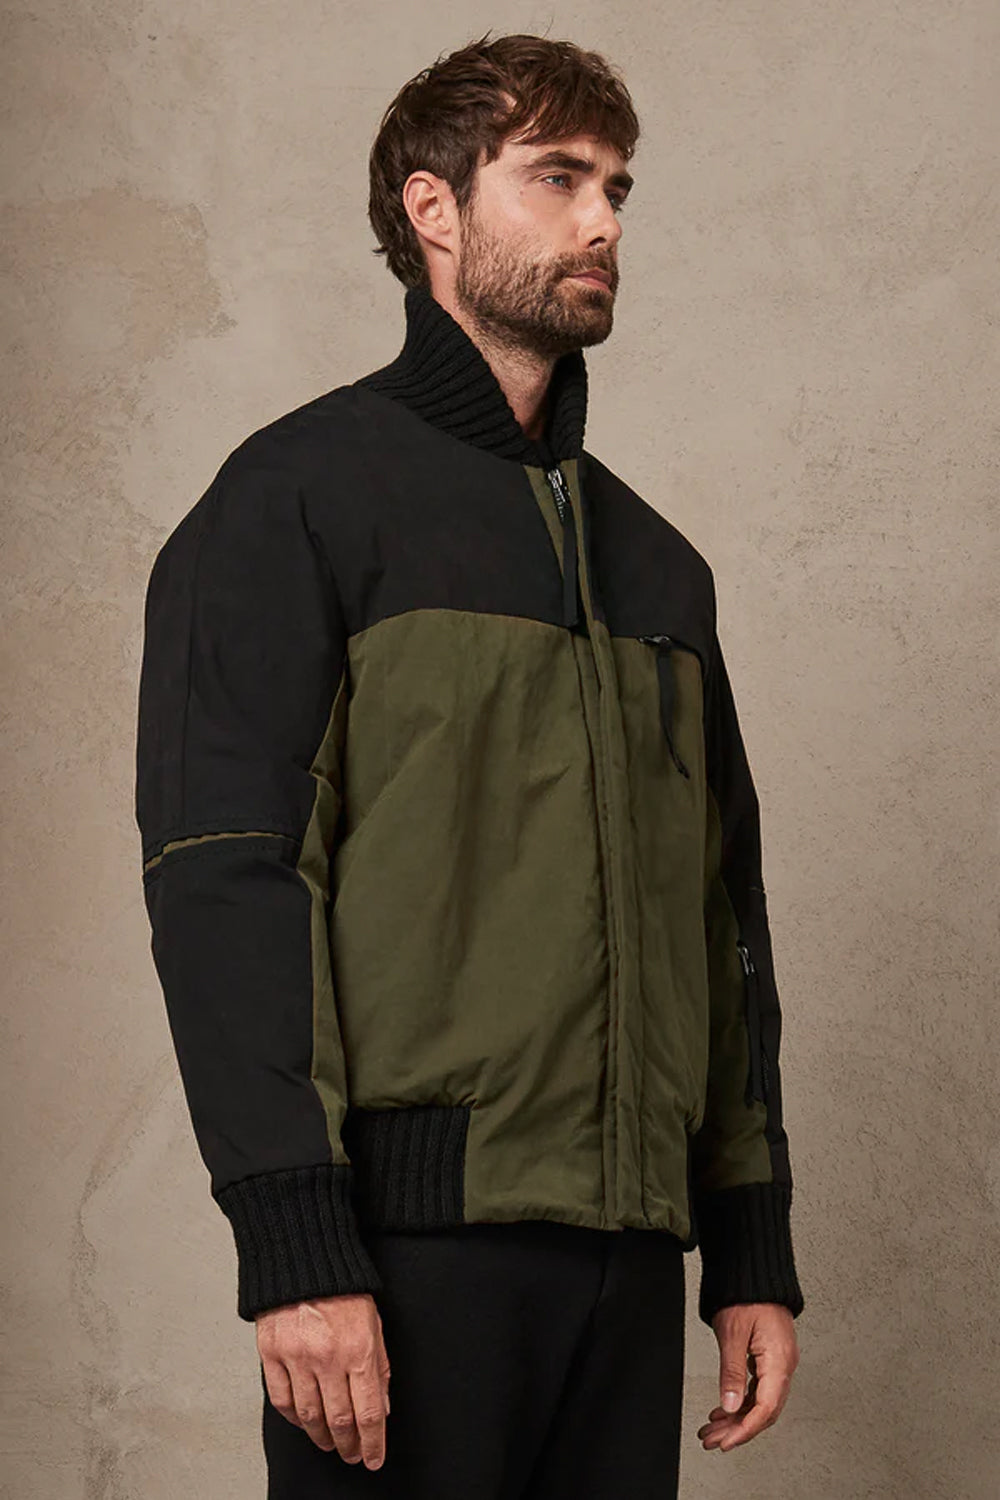 Buy the Transit Water Repellent Oversized Bomber Jacket Black/Khaki Green at Intro. Spend £50 for free UK delivery. Official stockists. We ship worldwide.